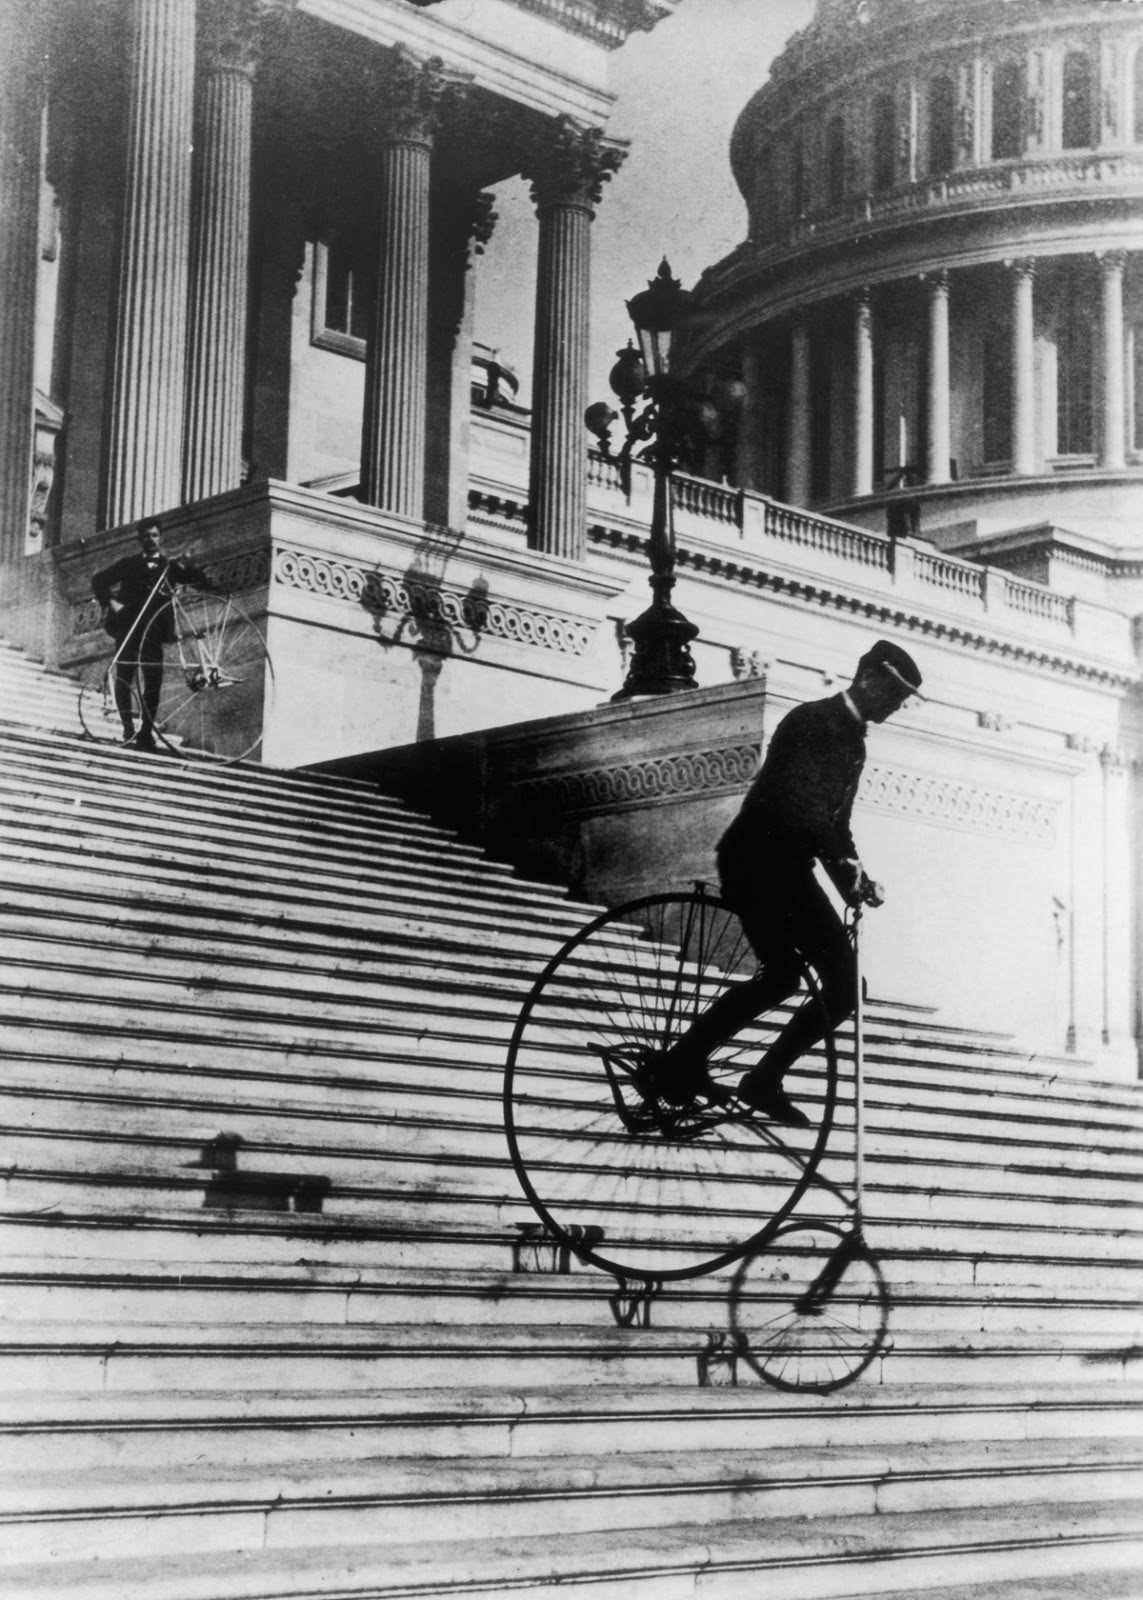 Men ride penny-farthings down the steps of the United States capitol building, 1895.